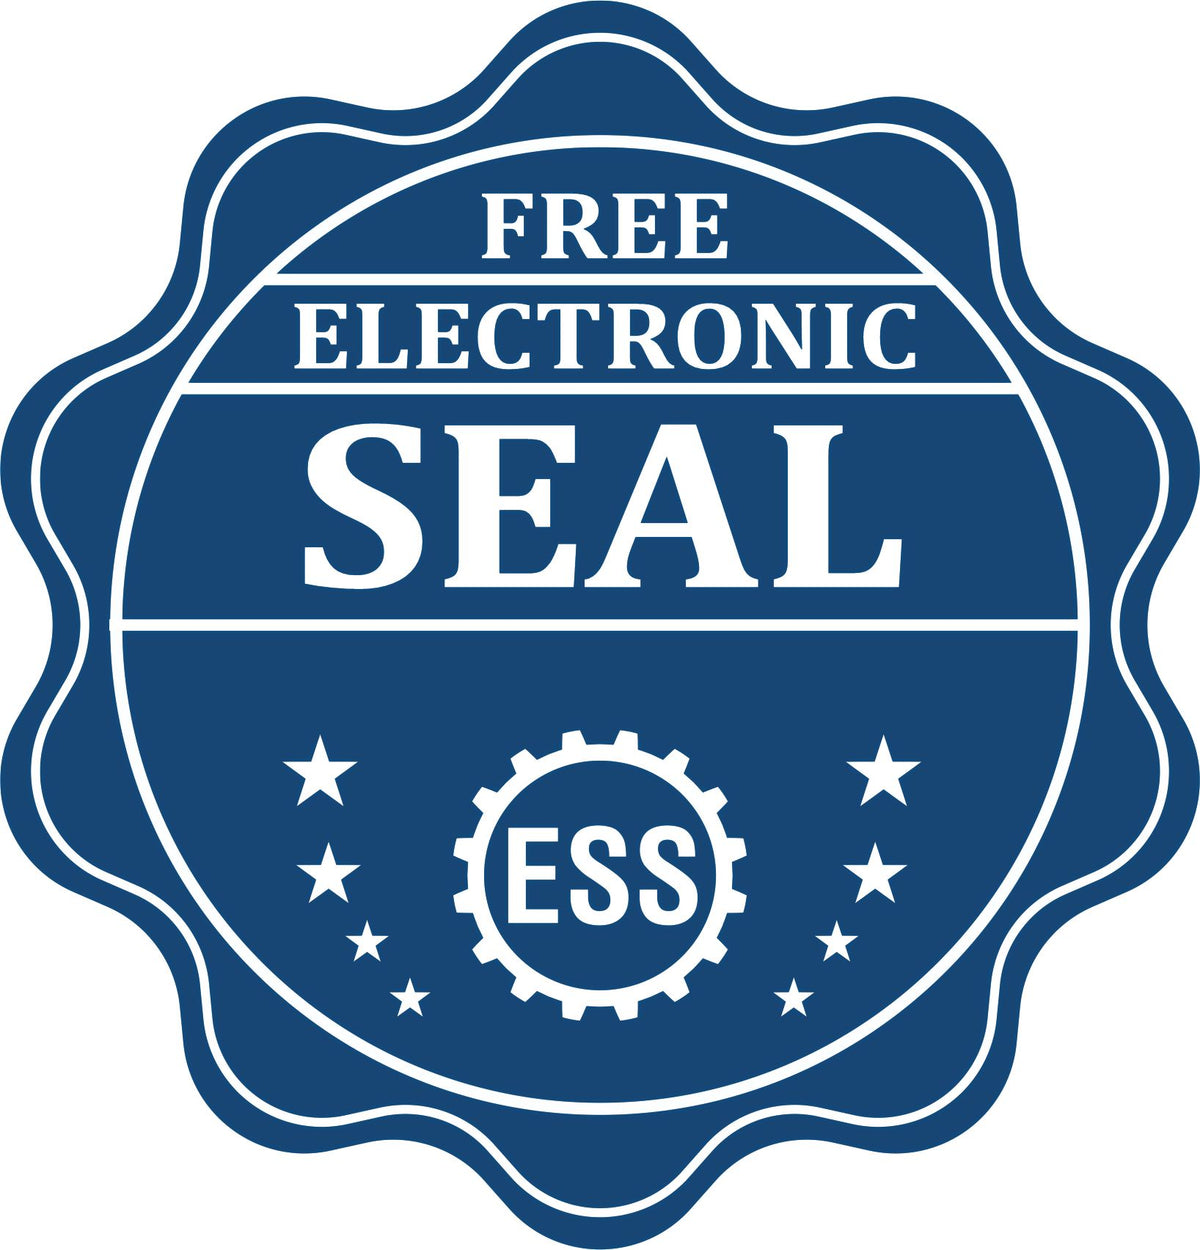 A badge showing a free electronic seal for the Hybrid New Mexico Landscape Architect Seal with stars and the ESS gear on the emblem.